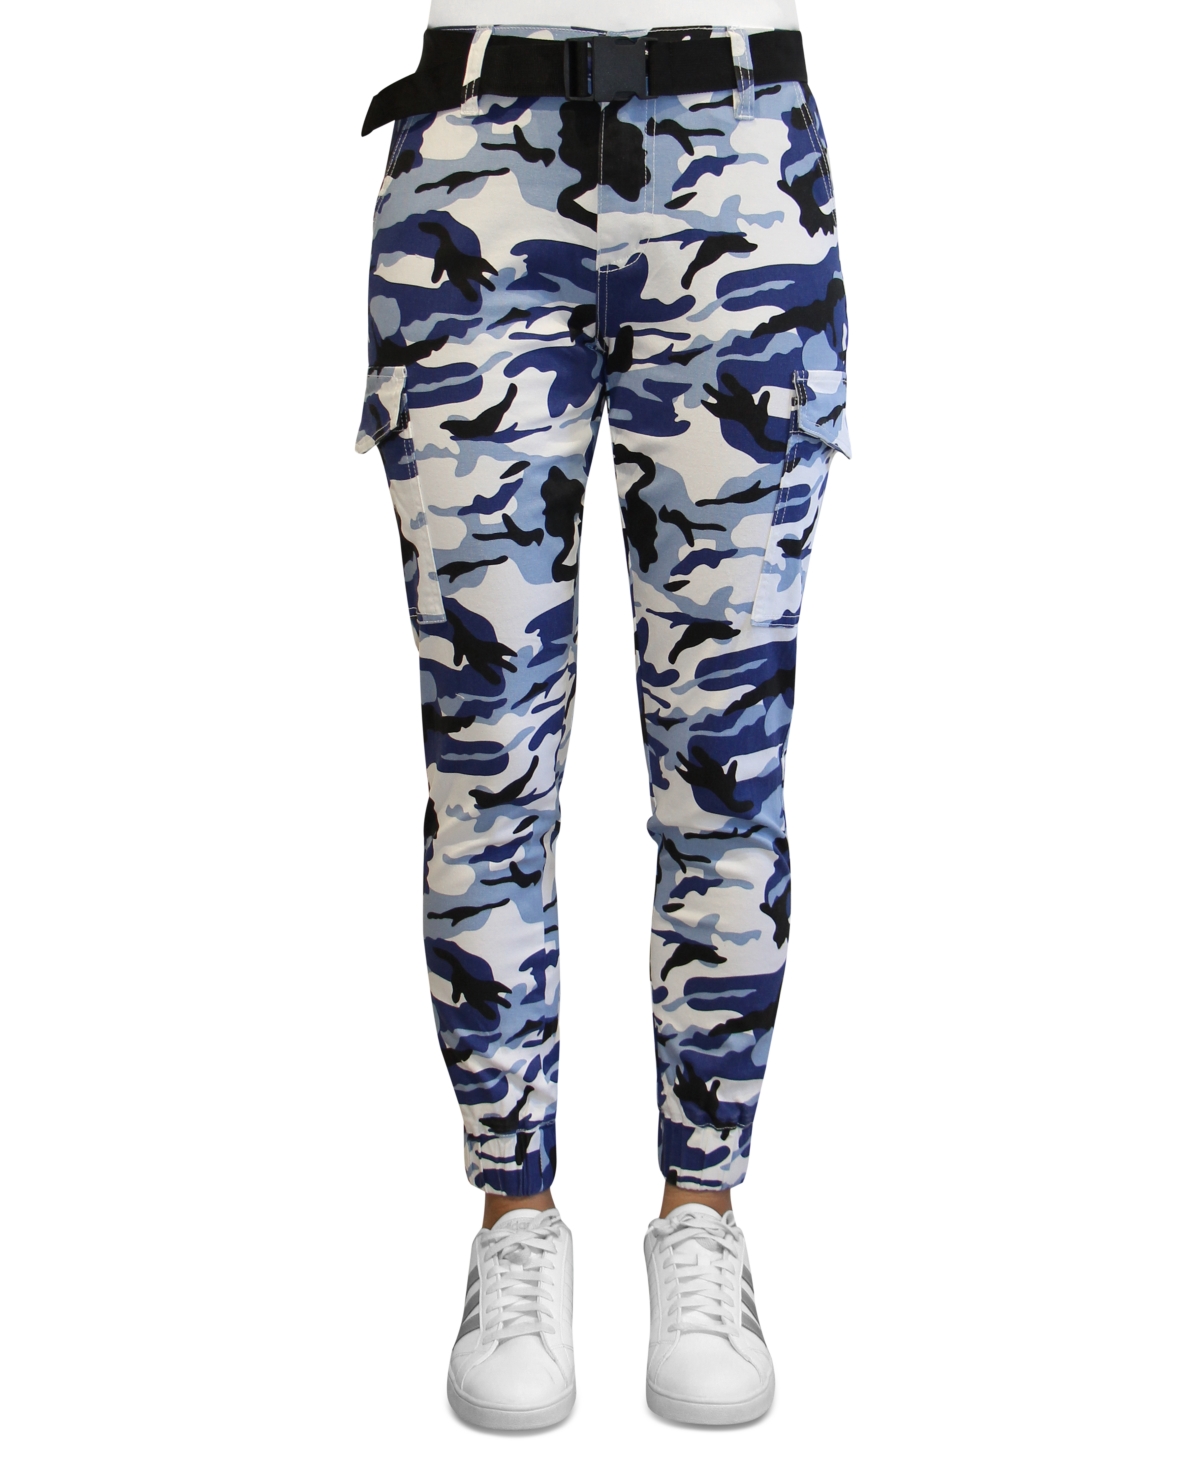 Crave Fame Juniors' High-Rise Belted Cargo Pants - Blue Camo